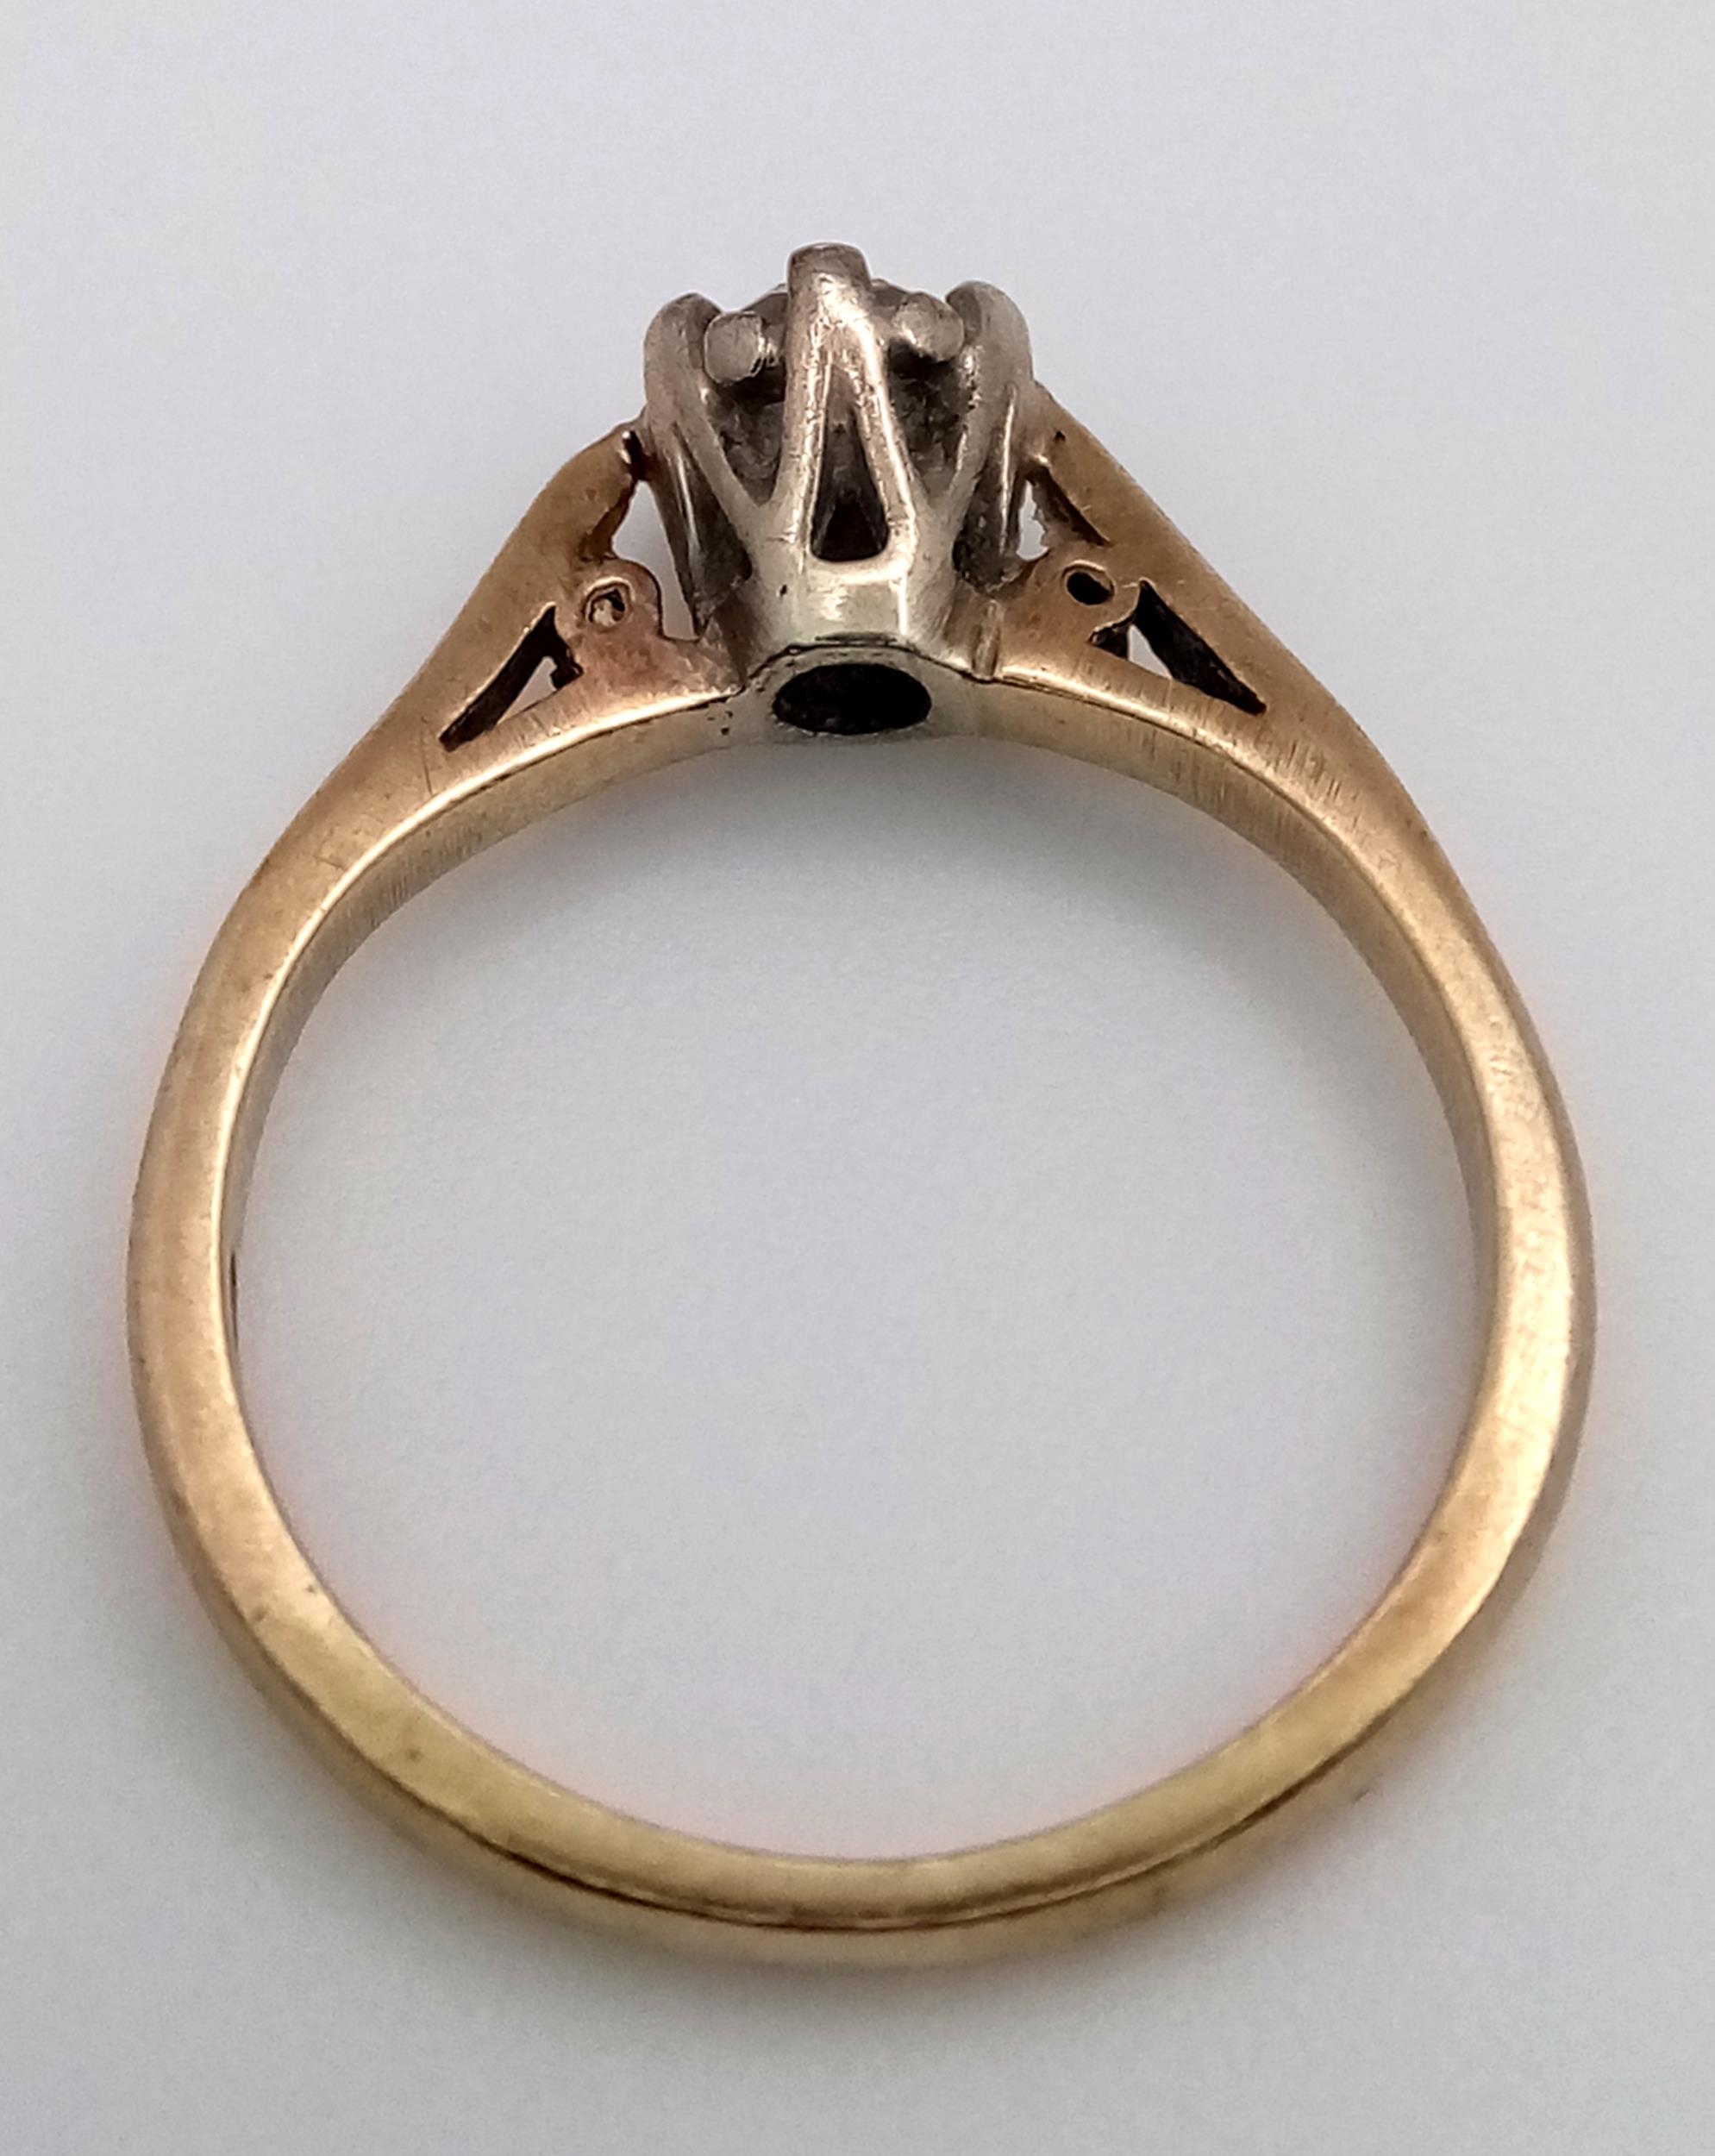 A 9K Yellow Gold Diamond Solitaire Ring. 0.25ct diamond. Size J. 2g total weight. - Image 4 of 6